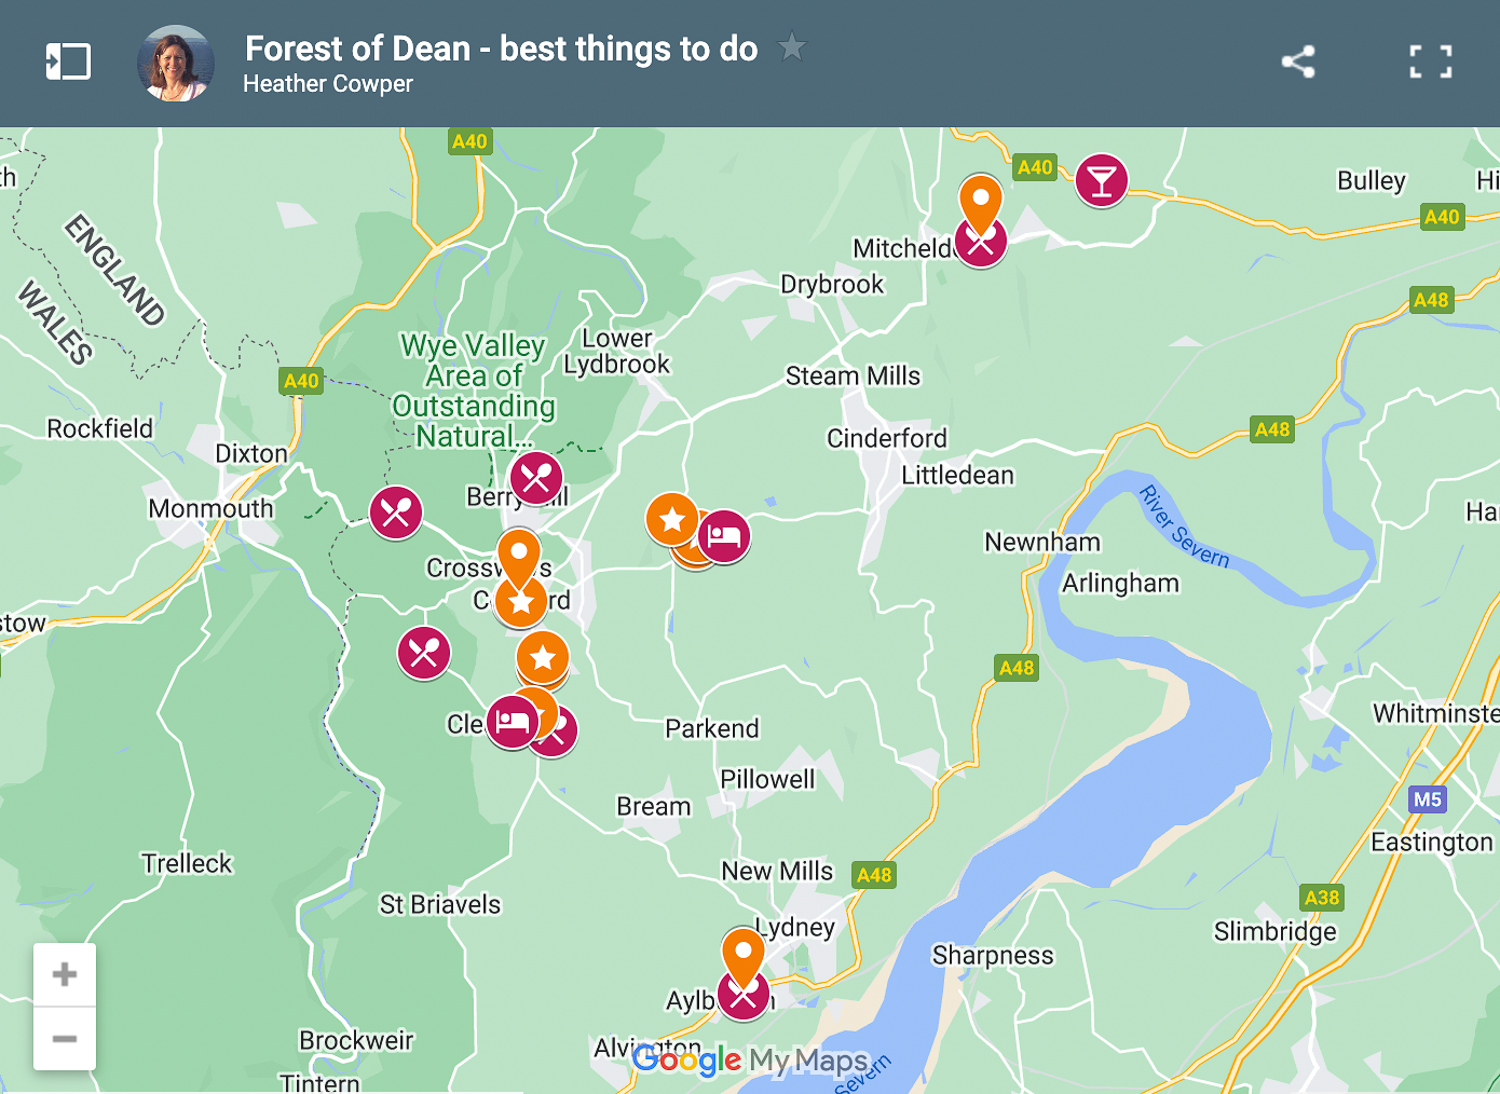 Map of Things to do in the Forest of Dean by Heatheronhertravels.com